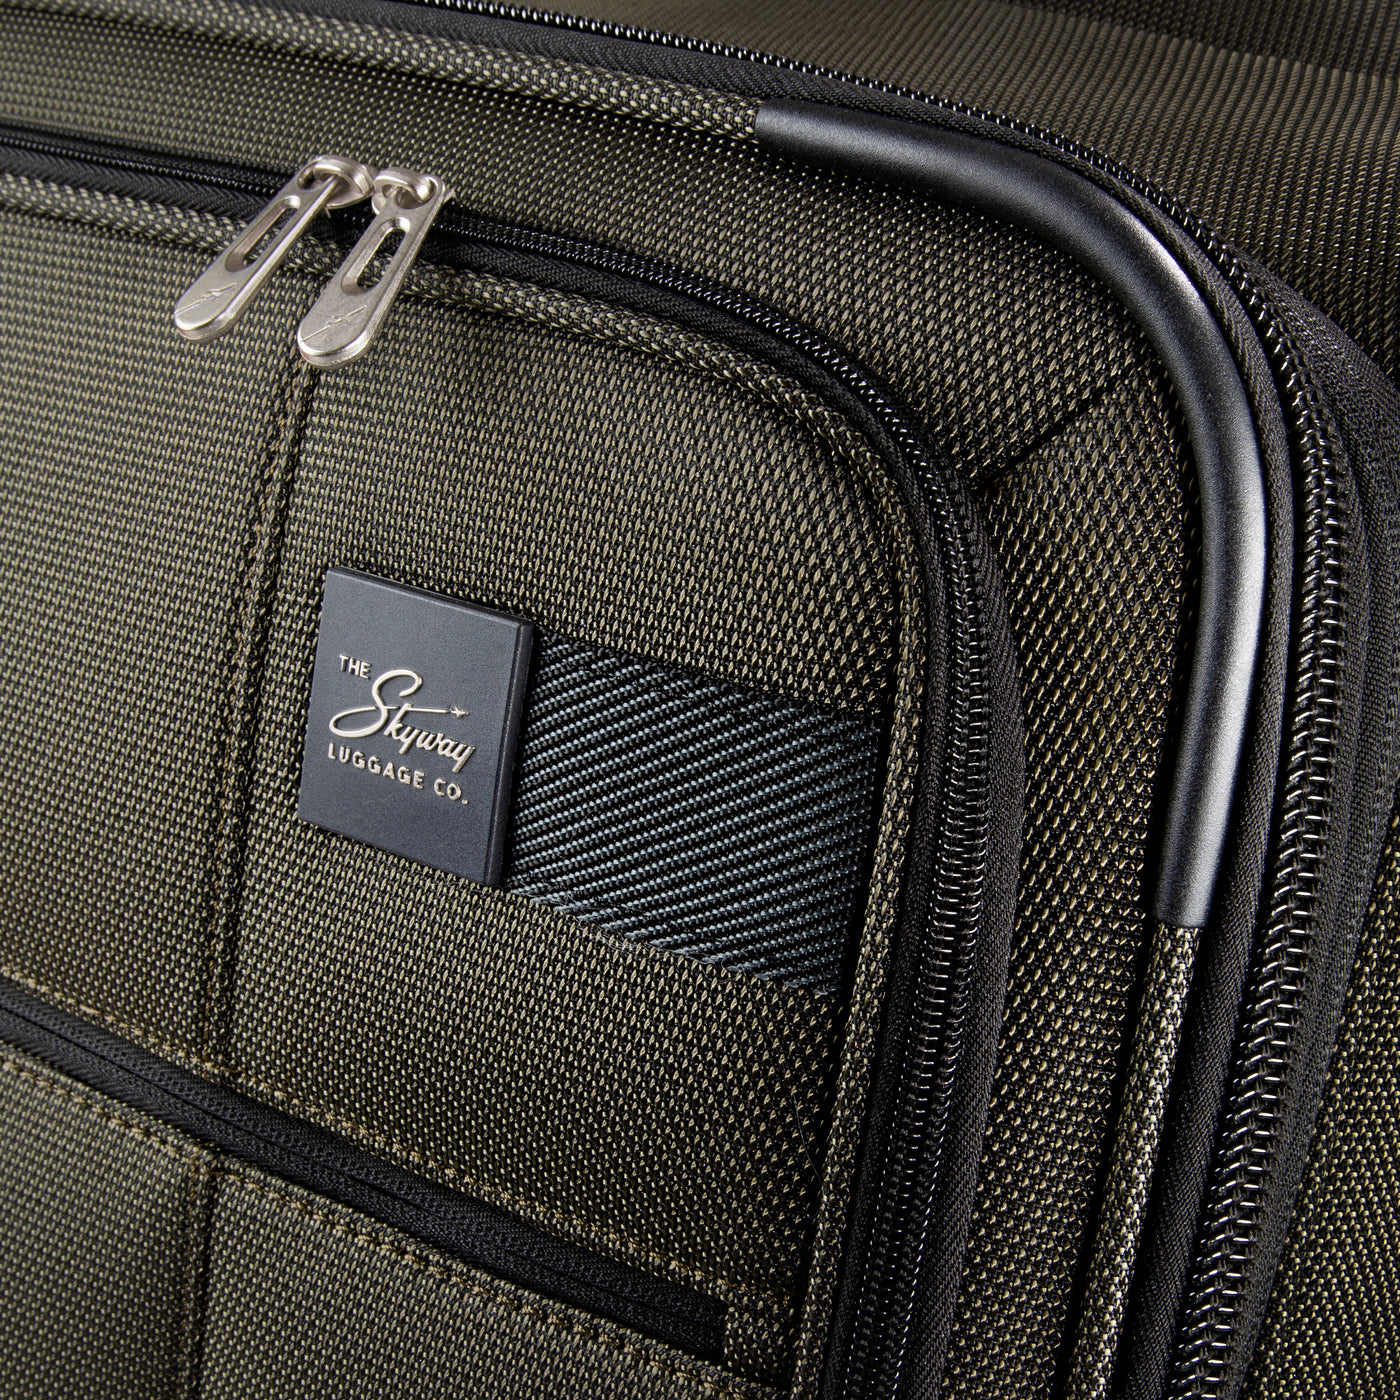 Sigma 7.0 Softside Carry-On Expandable Spinner